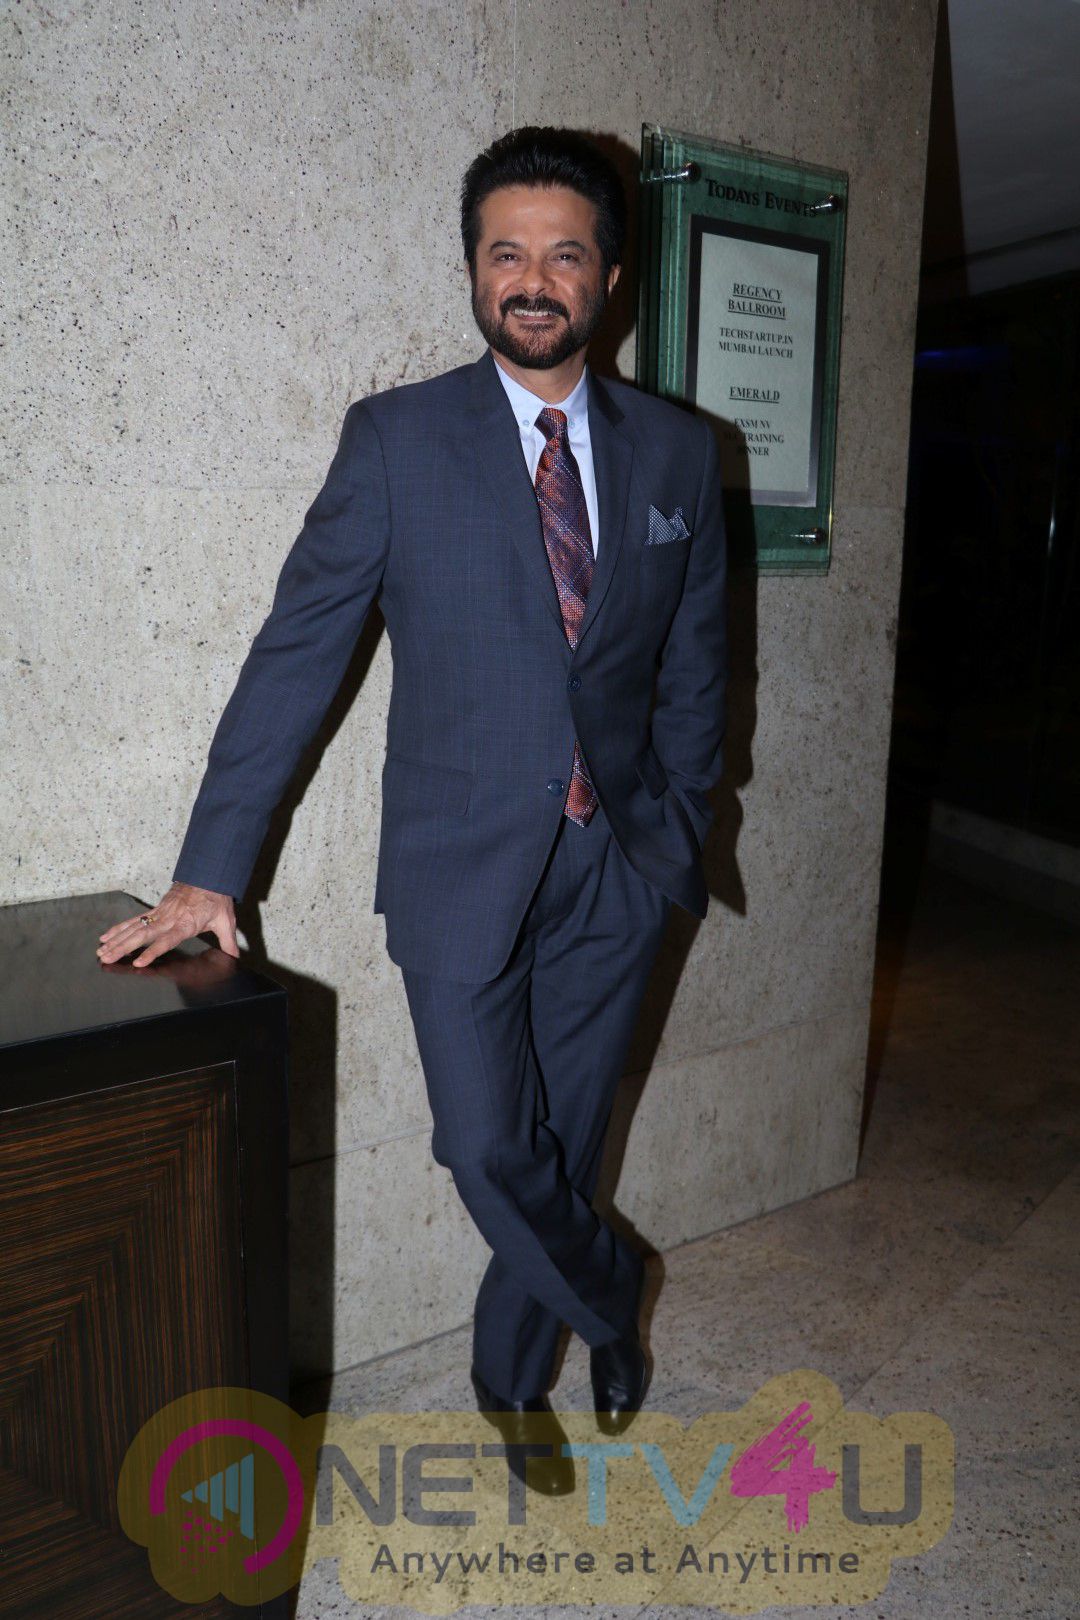  Indi Com Association With IBM Startup Initiative With Anil Kapoor Handsome Photos Hindi Gallery